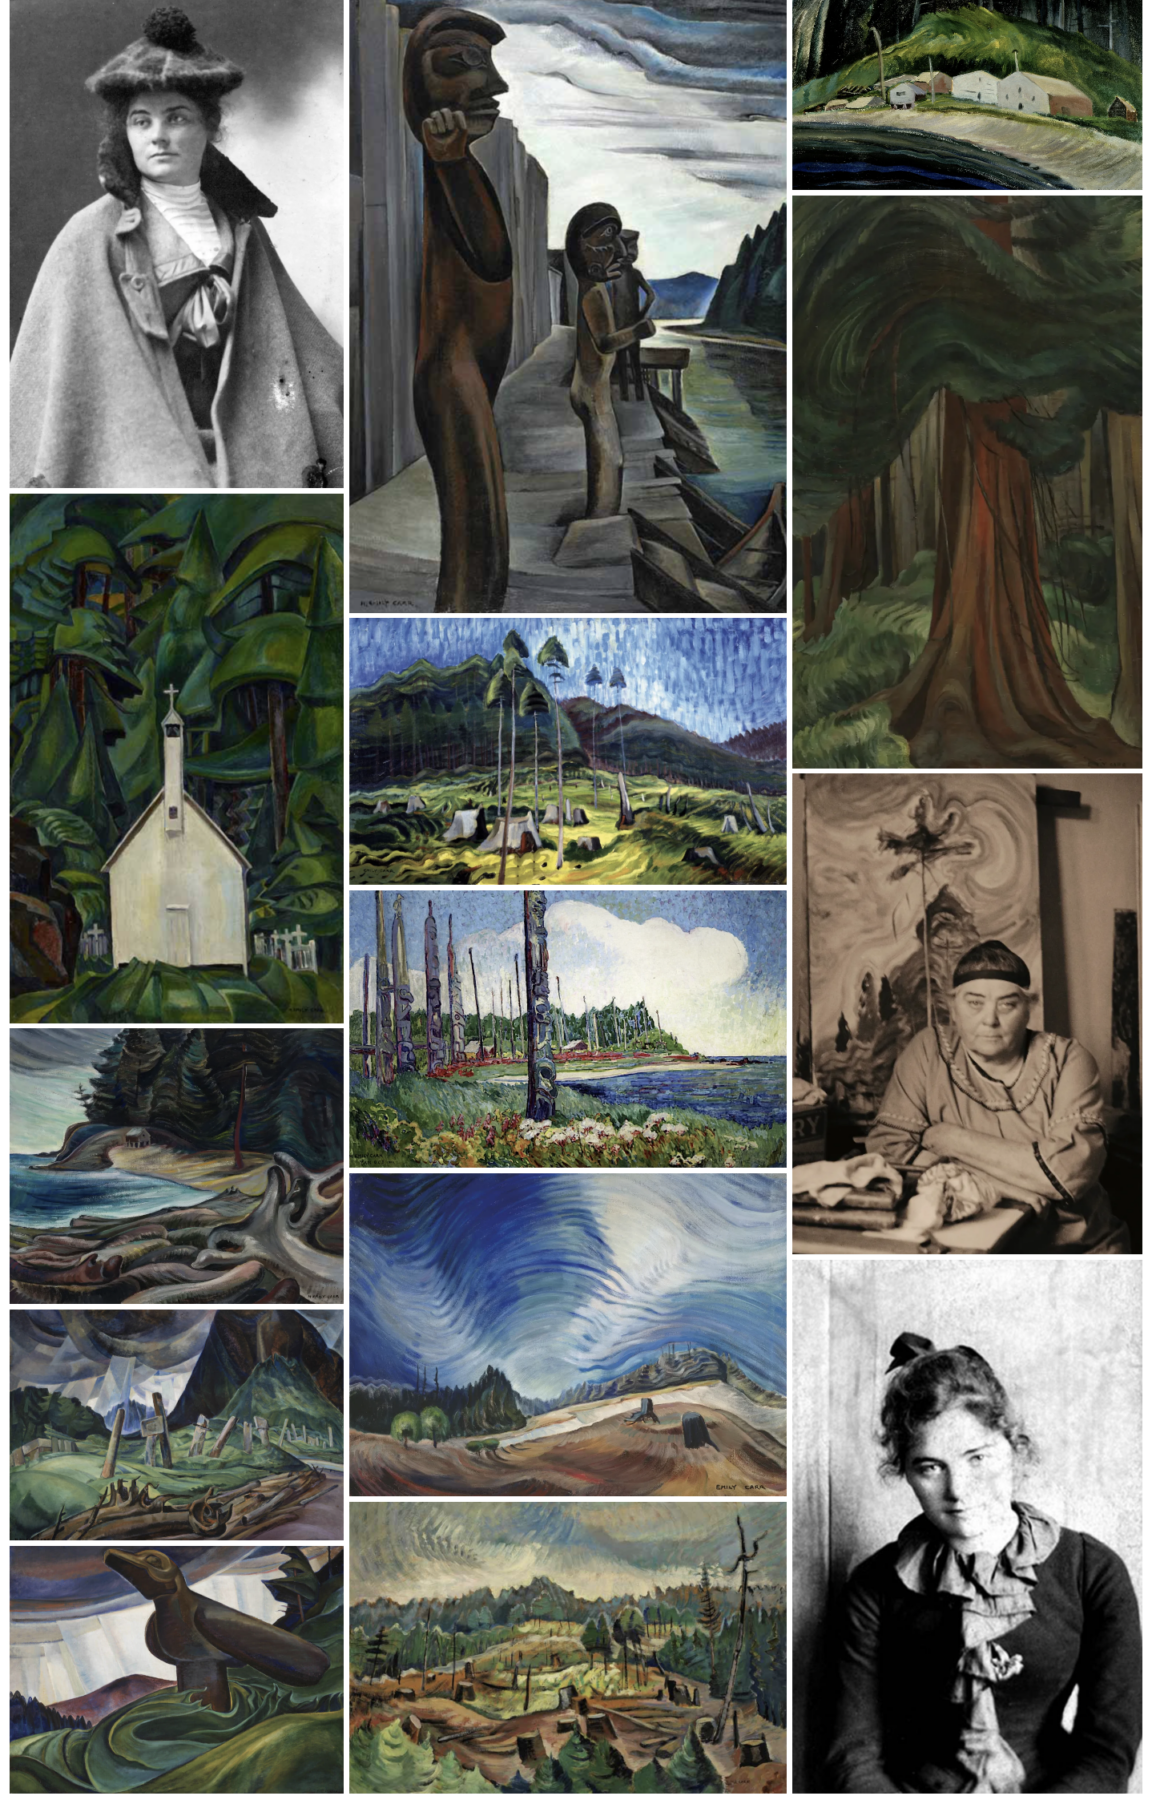 Emily Carr - Canadian artist renowned for Canadian paintings and artwork